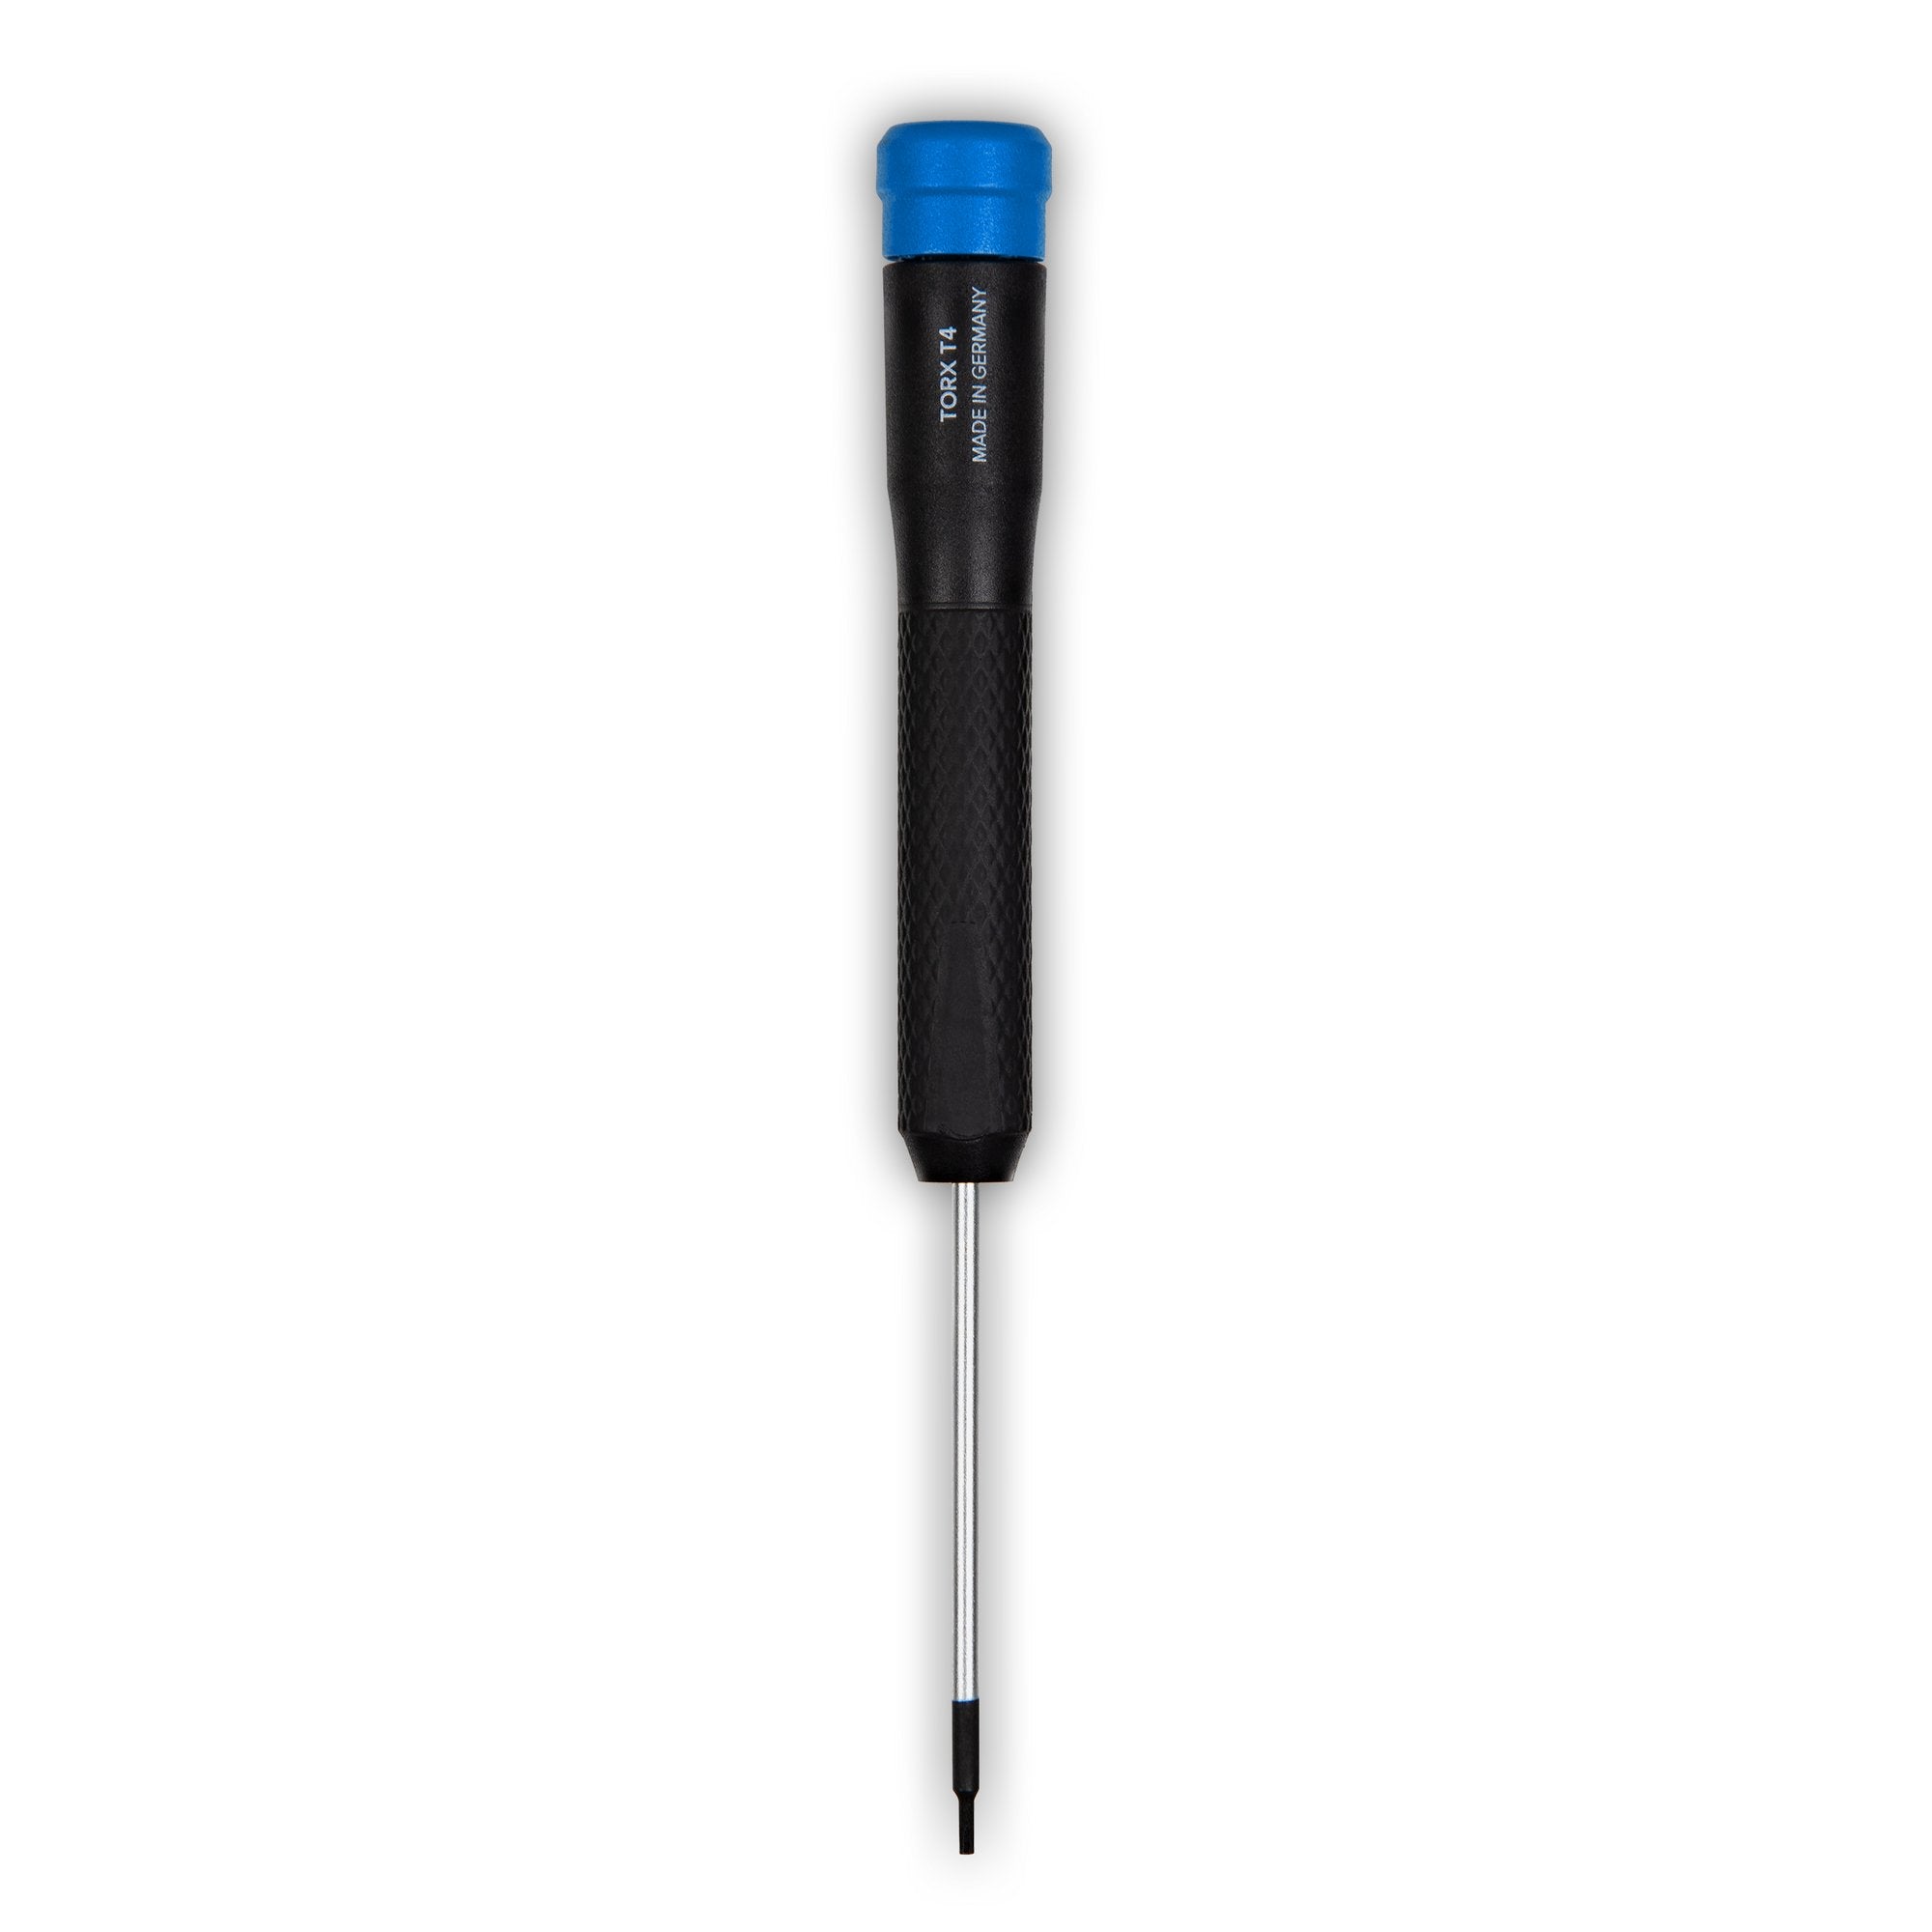 T4 Torx Screwdriver New iFixit - Made in Germany